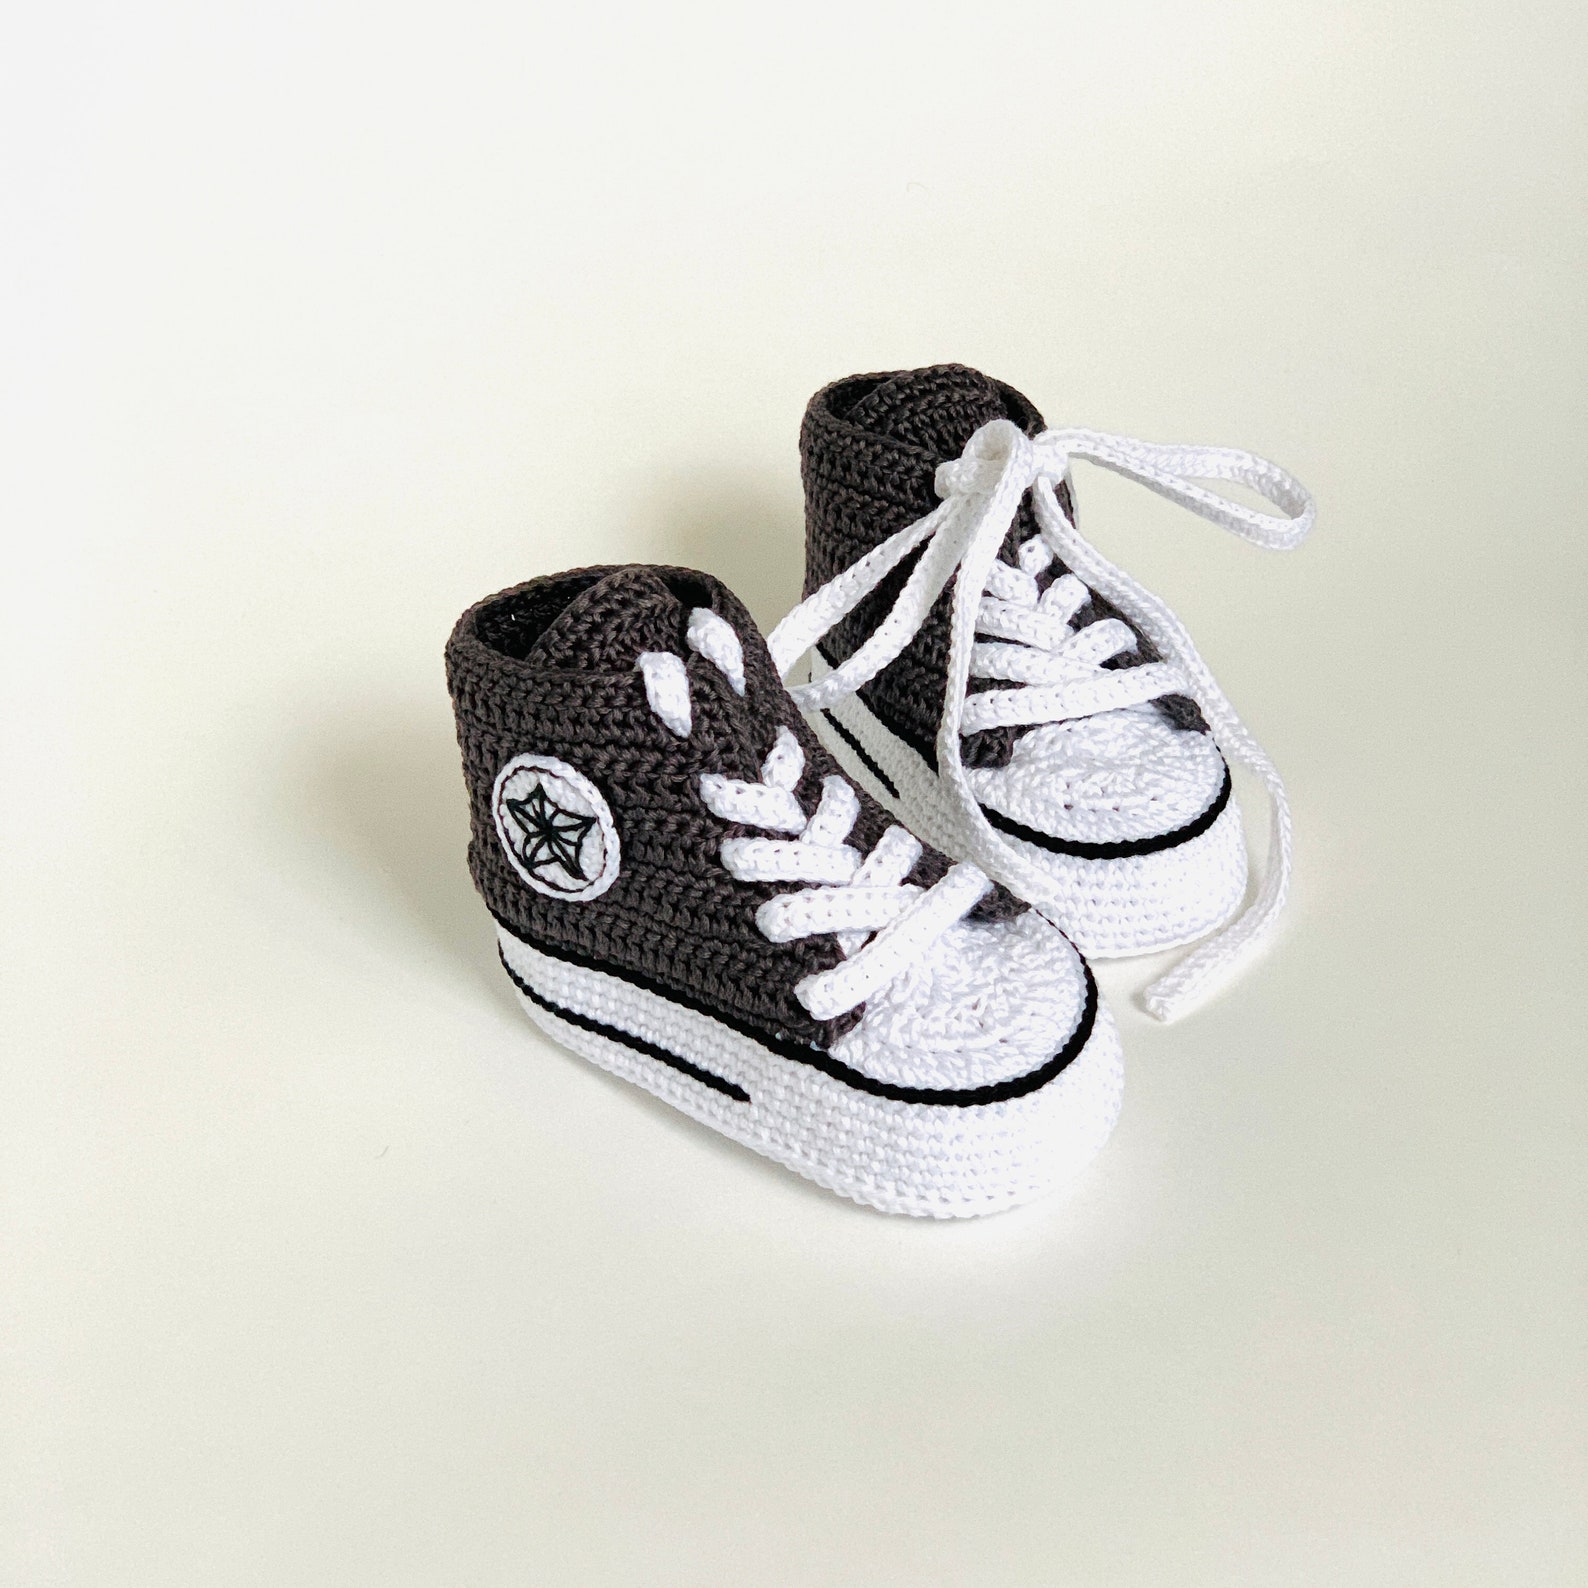 converse-for-baby-unisex-baby-shoes-newborn-booties-sneakers-etsy